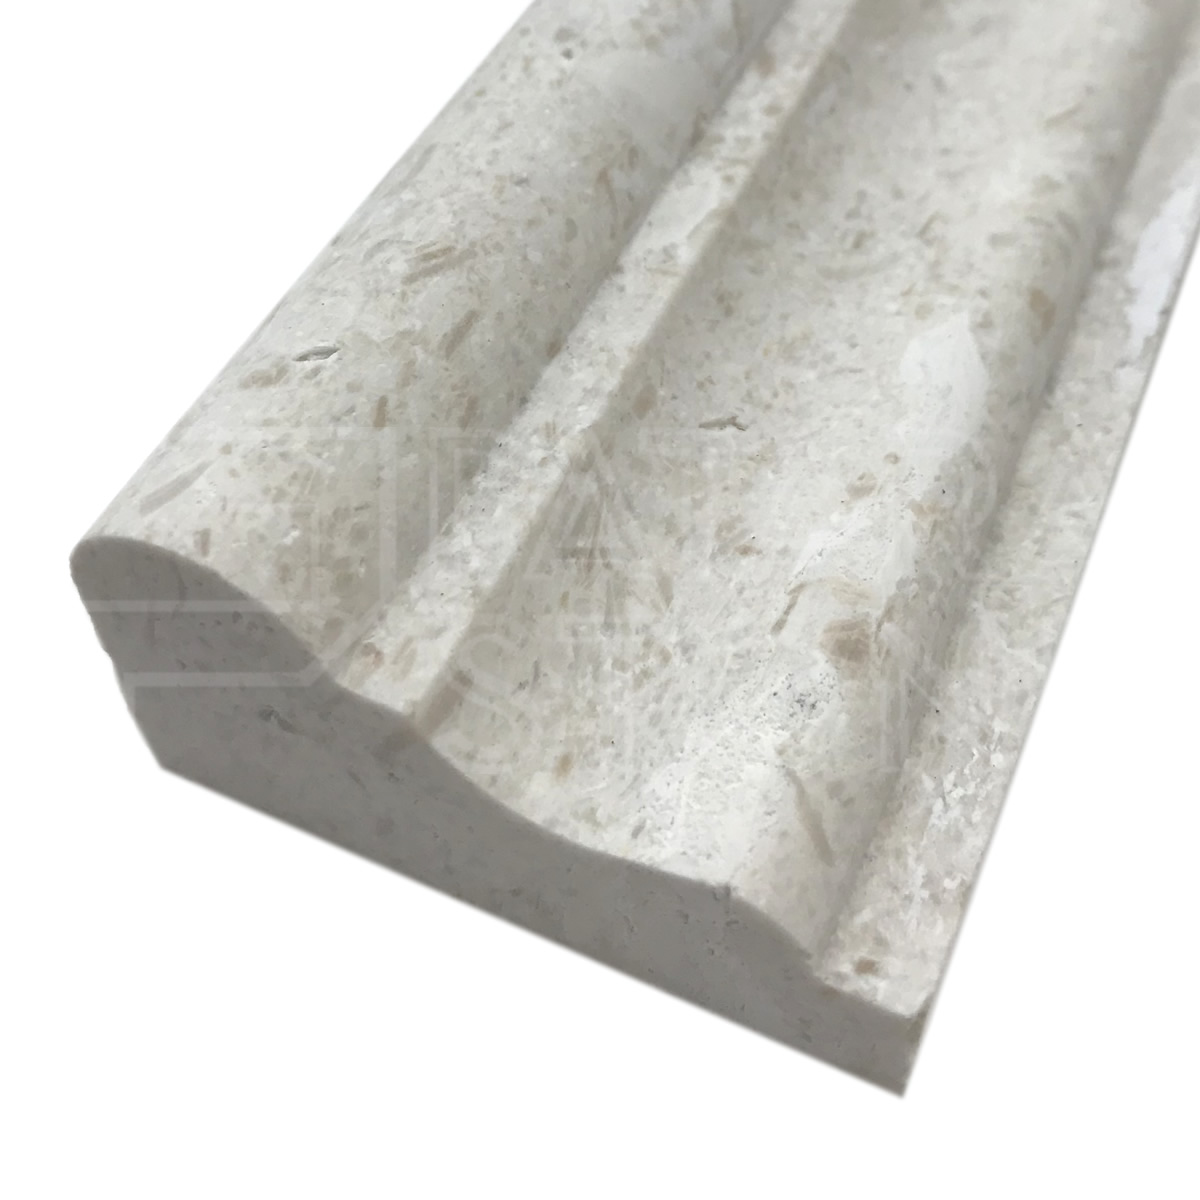 Stone Chair Rail : Chair Rail And Chair Rail Molding Stone Tile Shoppe Inc - The most popular resin fauxstone products are: